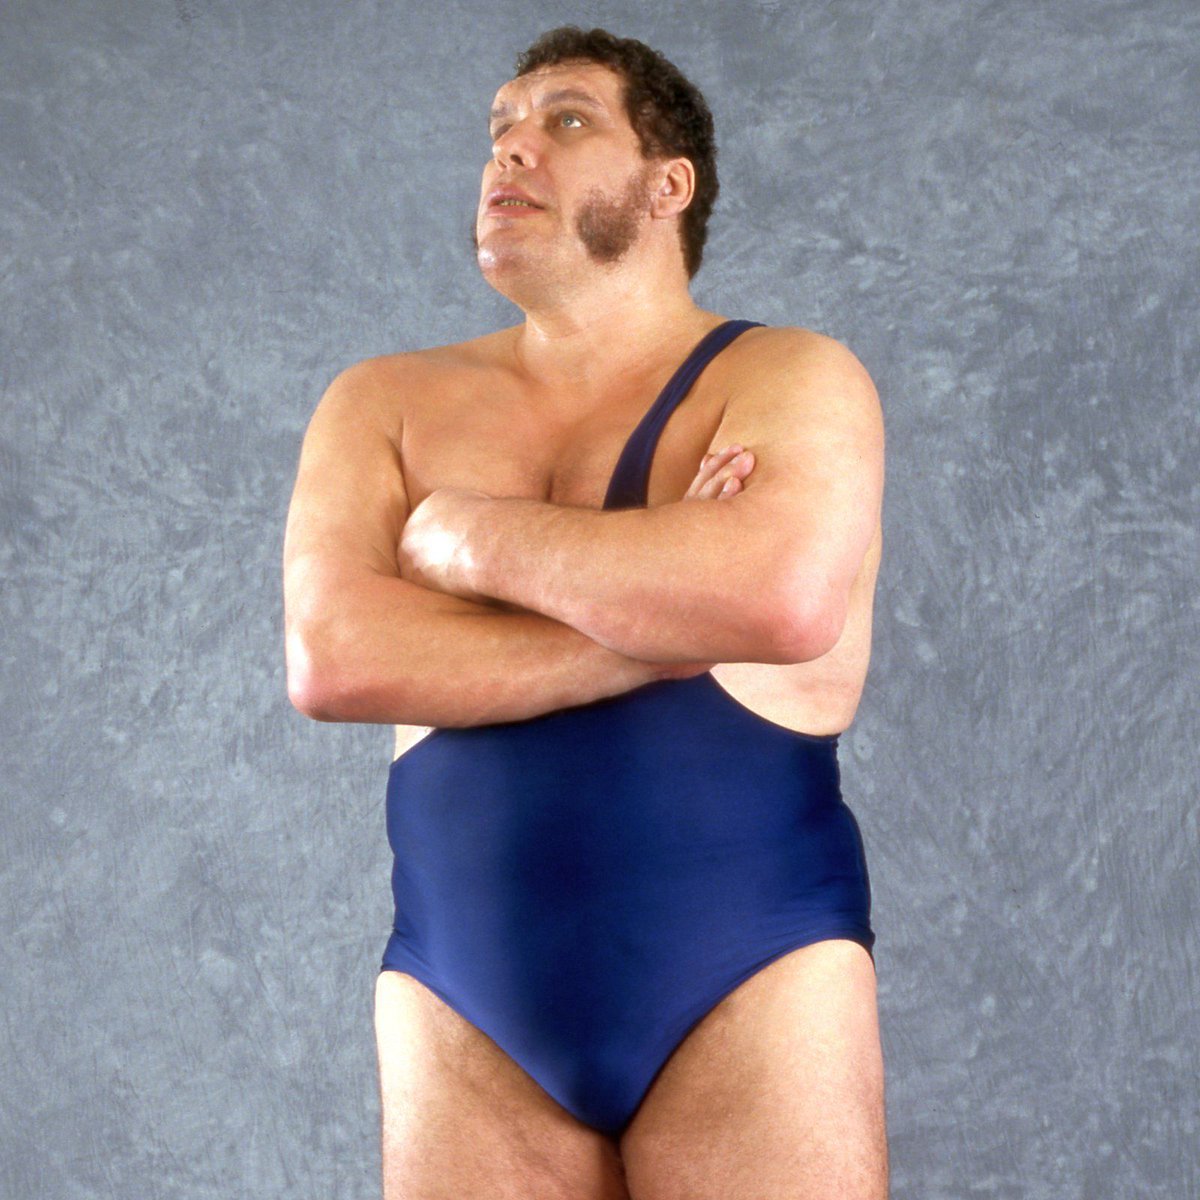 📷 WWF studio shot of the day - Andre the Giant. 📸 Photo from 1990. #WWF #WWE #Wrestling #AndretheGiant